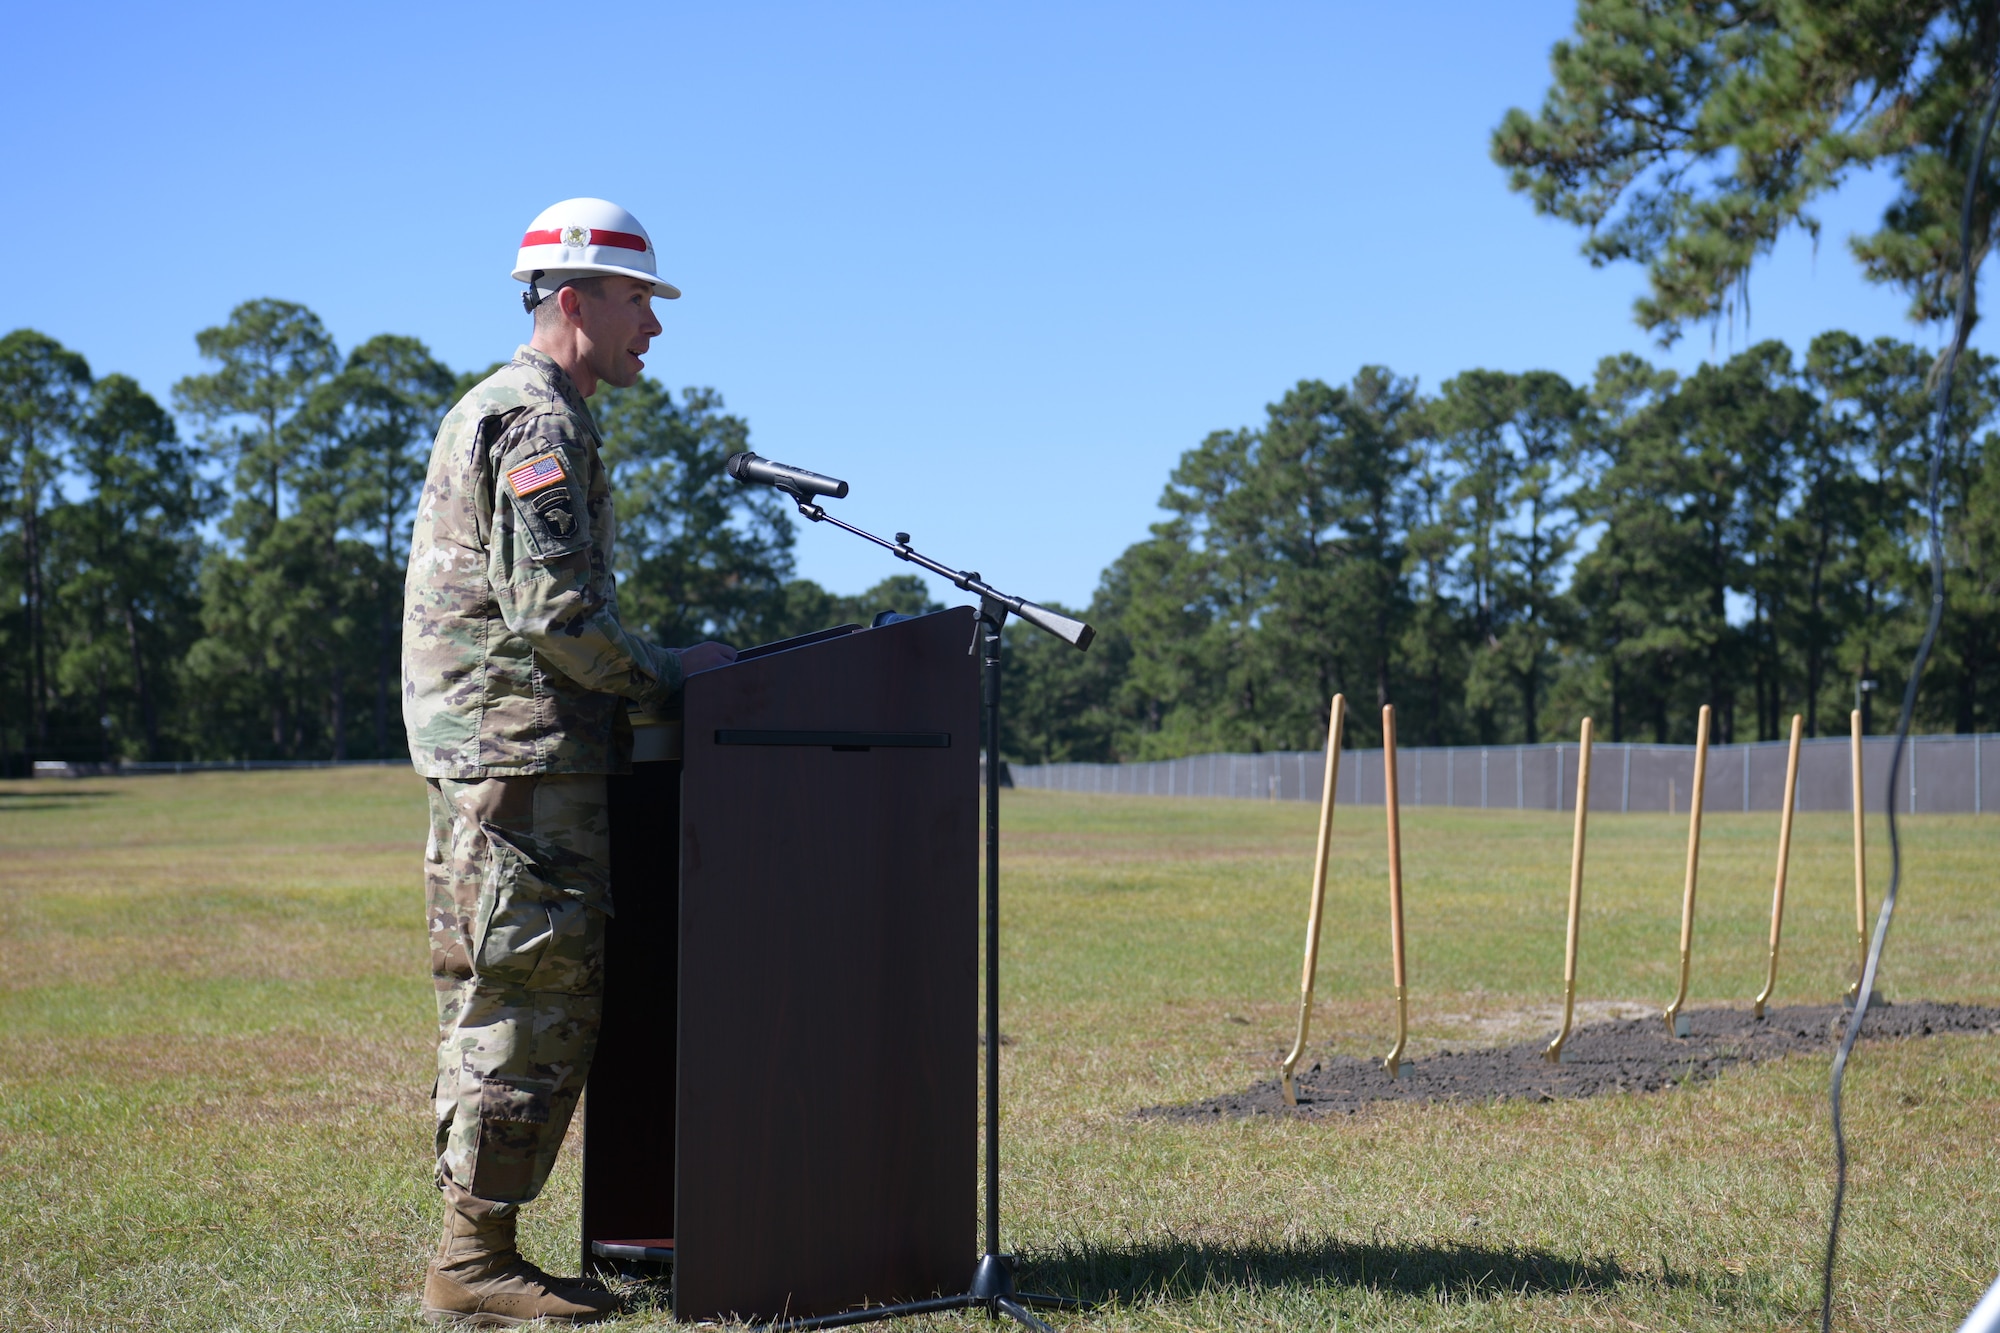 Maj. Paul Sipe, Army Corps of Engineers, Charleston District deputy commander, speaks at the groundbreaking of the new Visitor’s Quarters project Oct. 24, 2018 on Joint Base Charleston, S.C. The project is a result of low vacancy at the current Visitor’s Quarters. The modernized four-story structure will have 266 guest rooms, conference rooms, an exercise room, guest laundry and other amenities covering 150,000 square-feet. The Visitor’s Quarters project is slated for completion in Fall 2020.